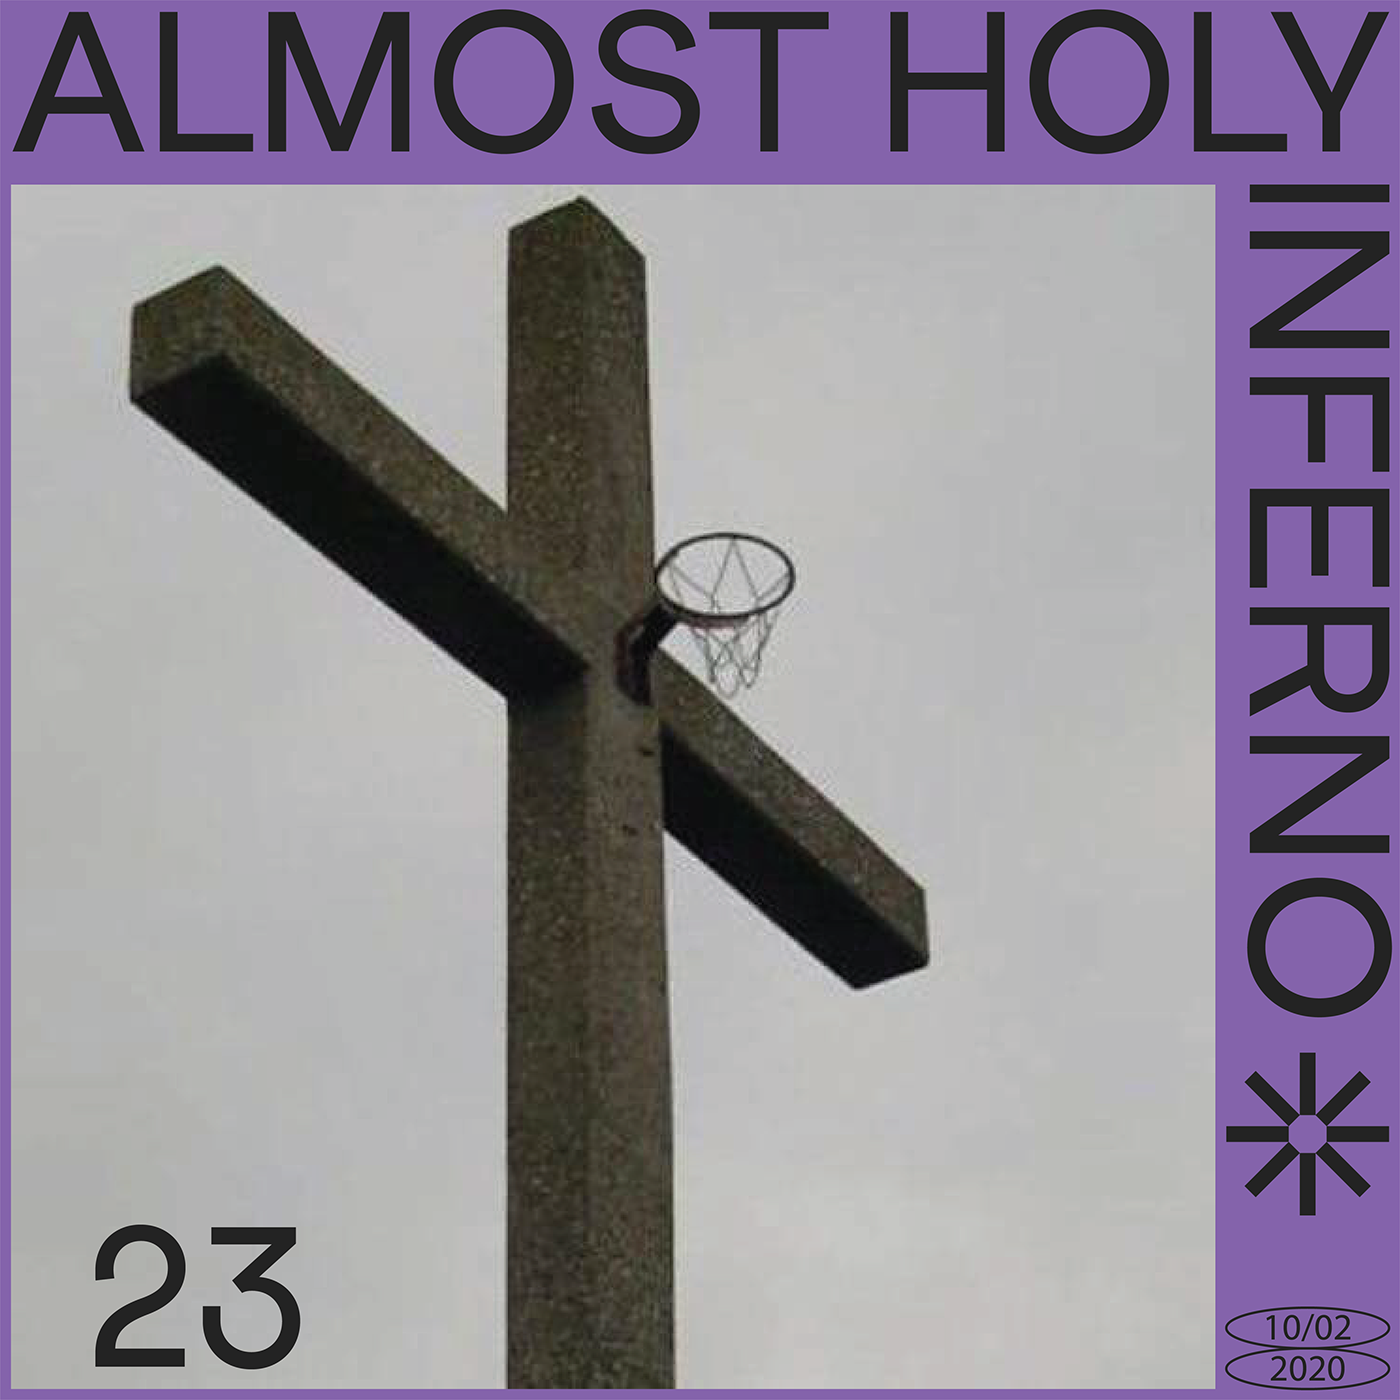 Almost holy inferno.